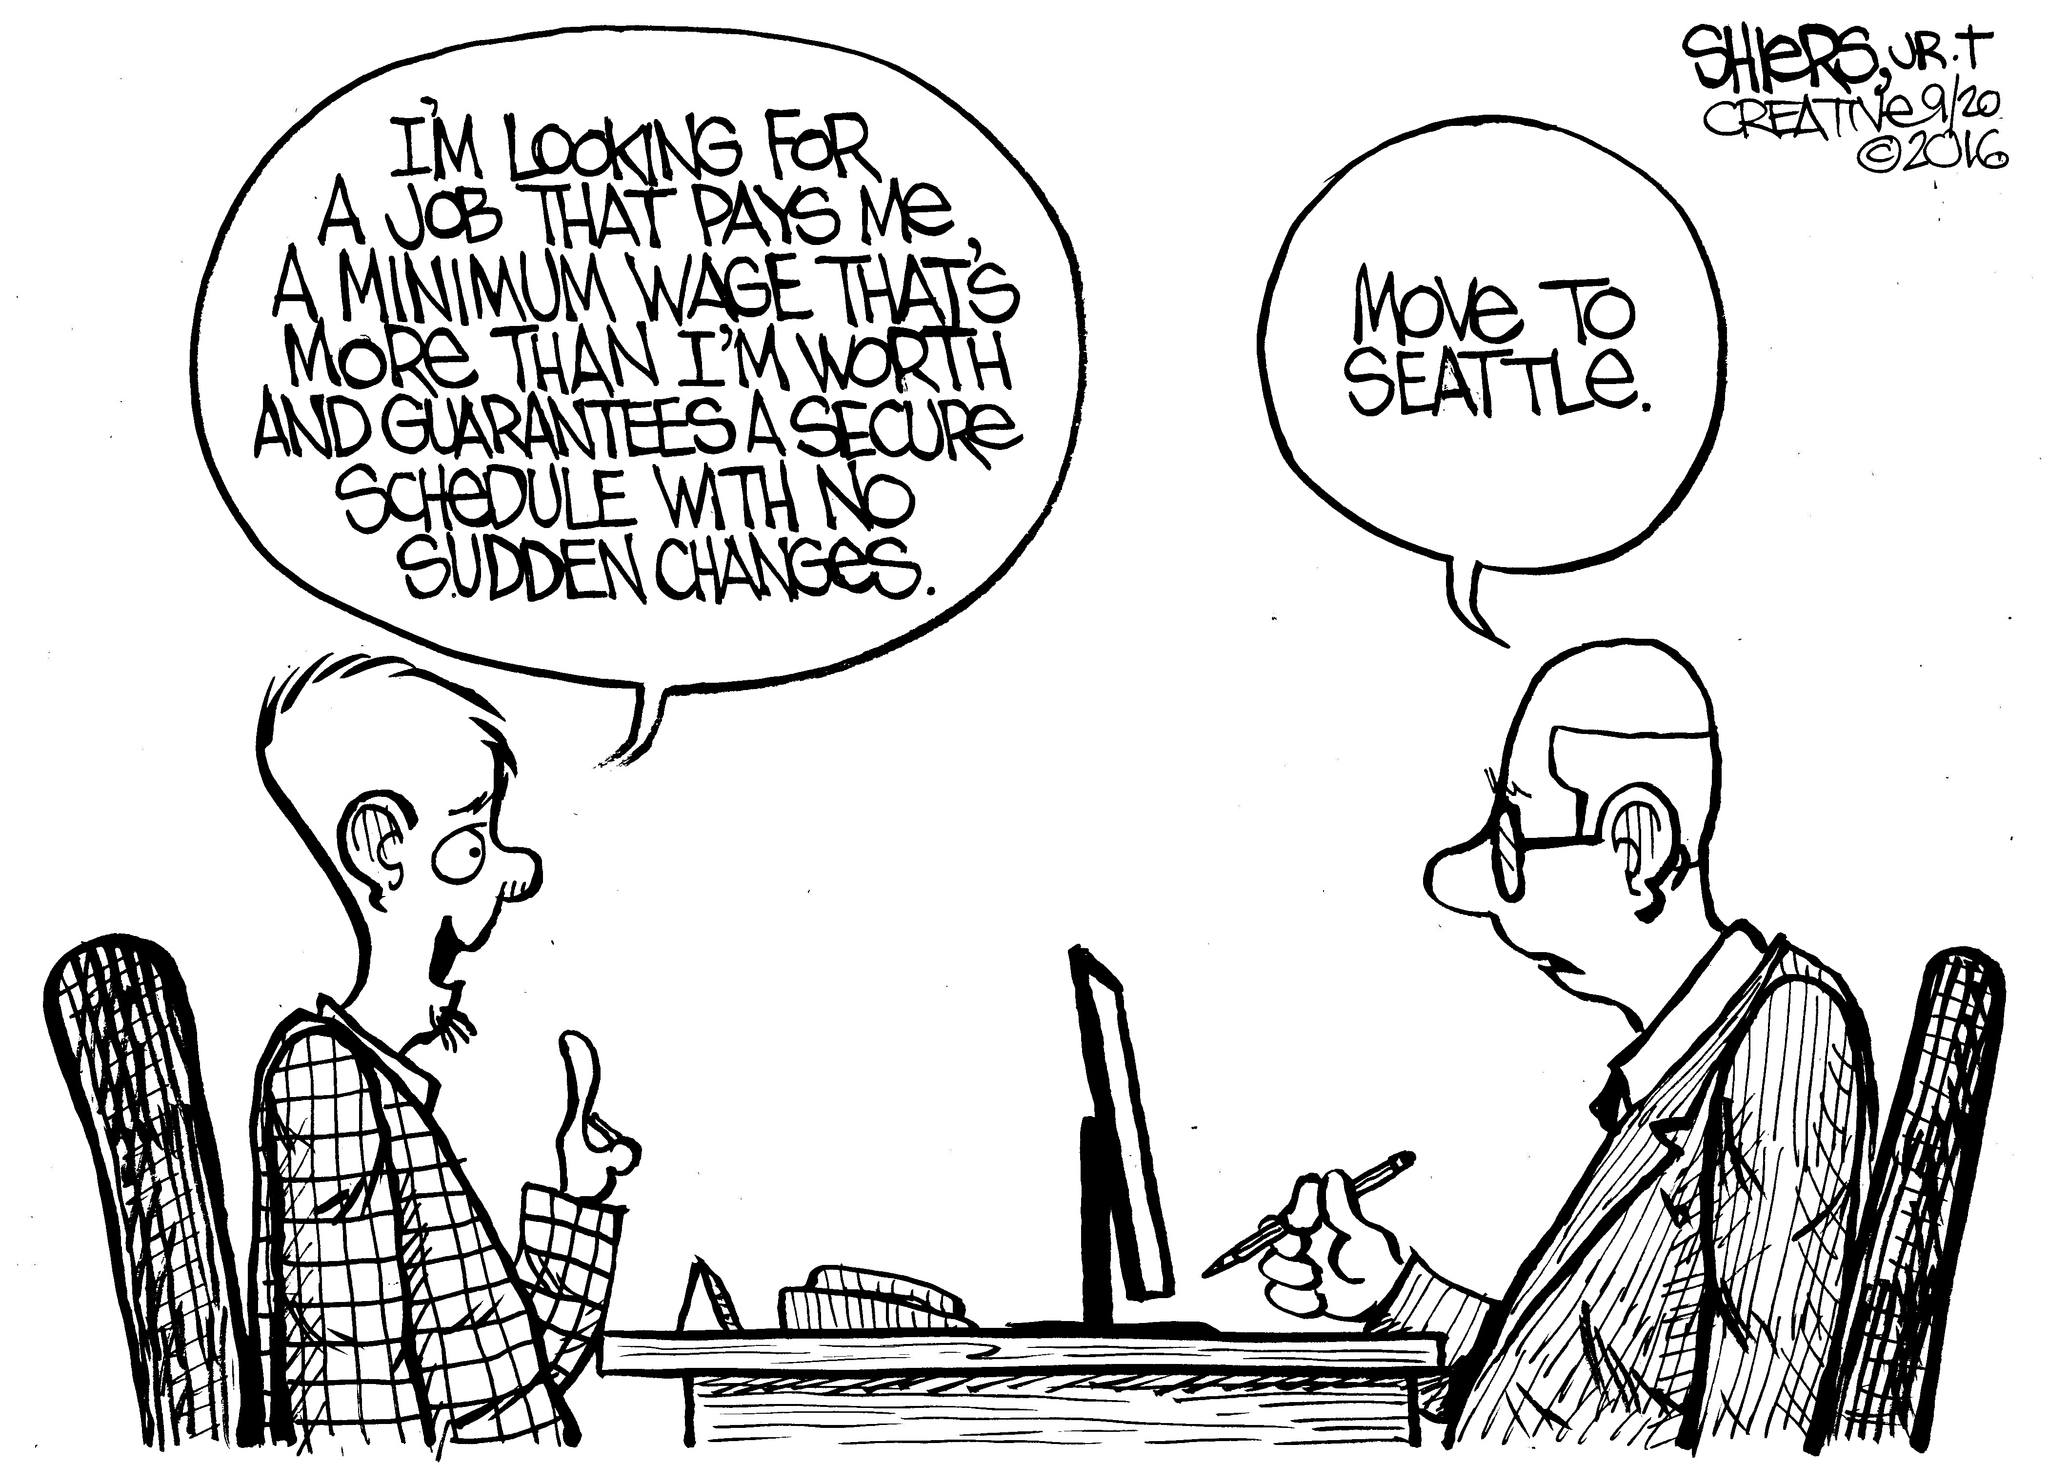 For that type of job move to Seattle | Cartoon for Sept. 22 - Frank Shiers